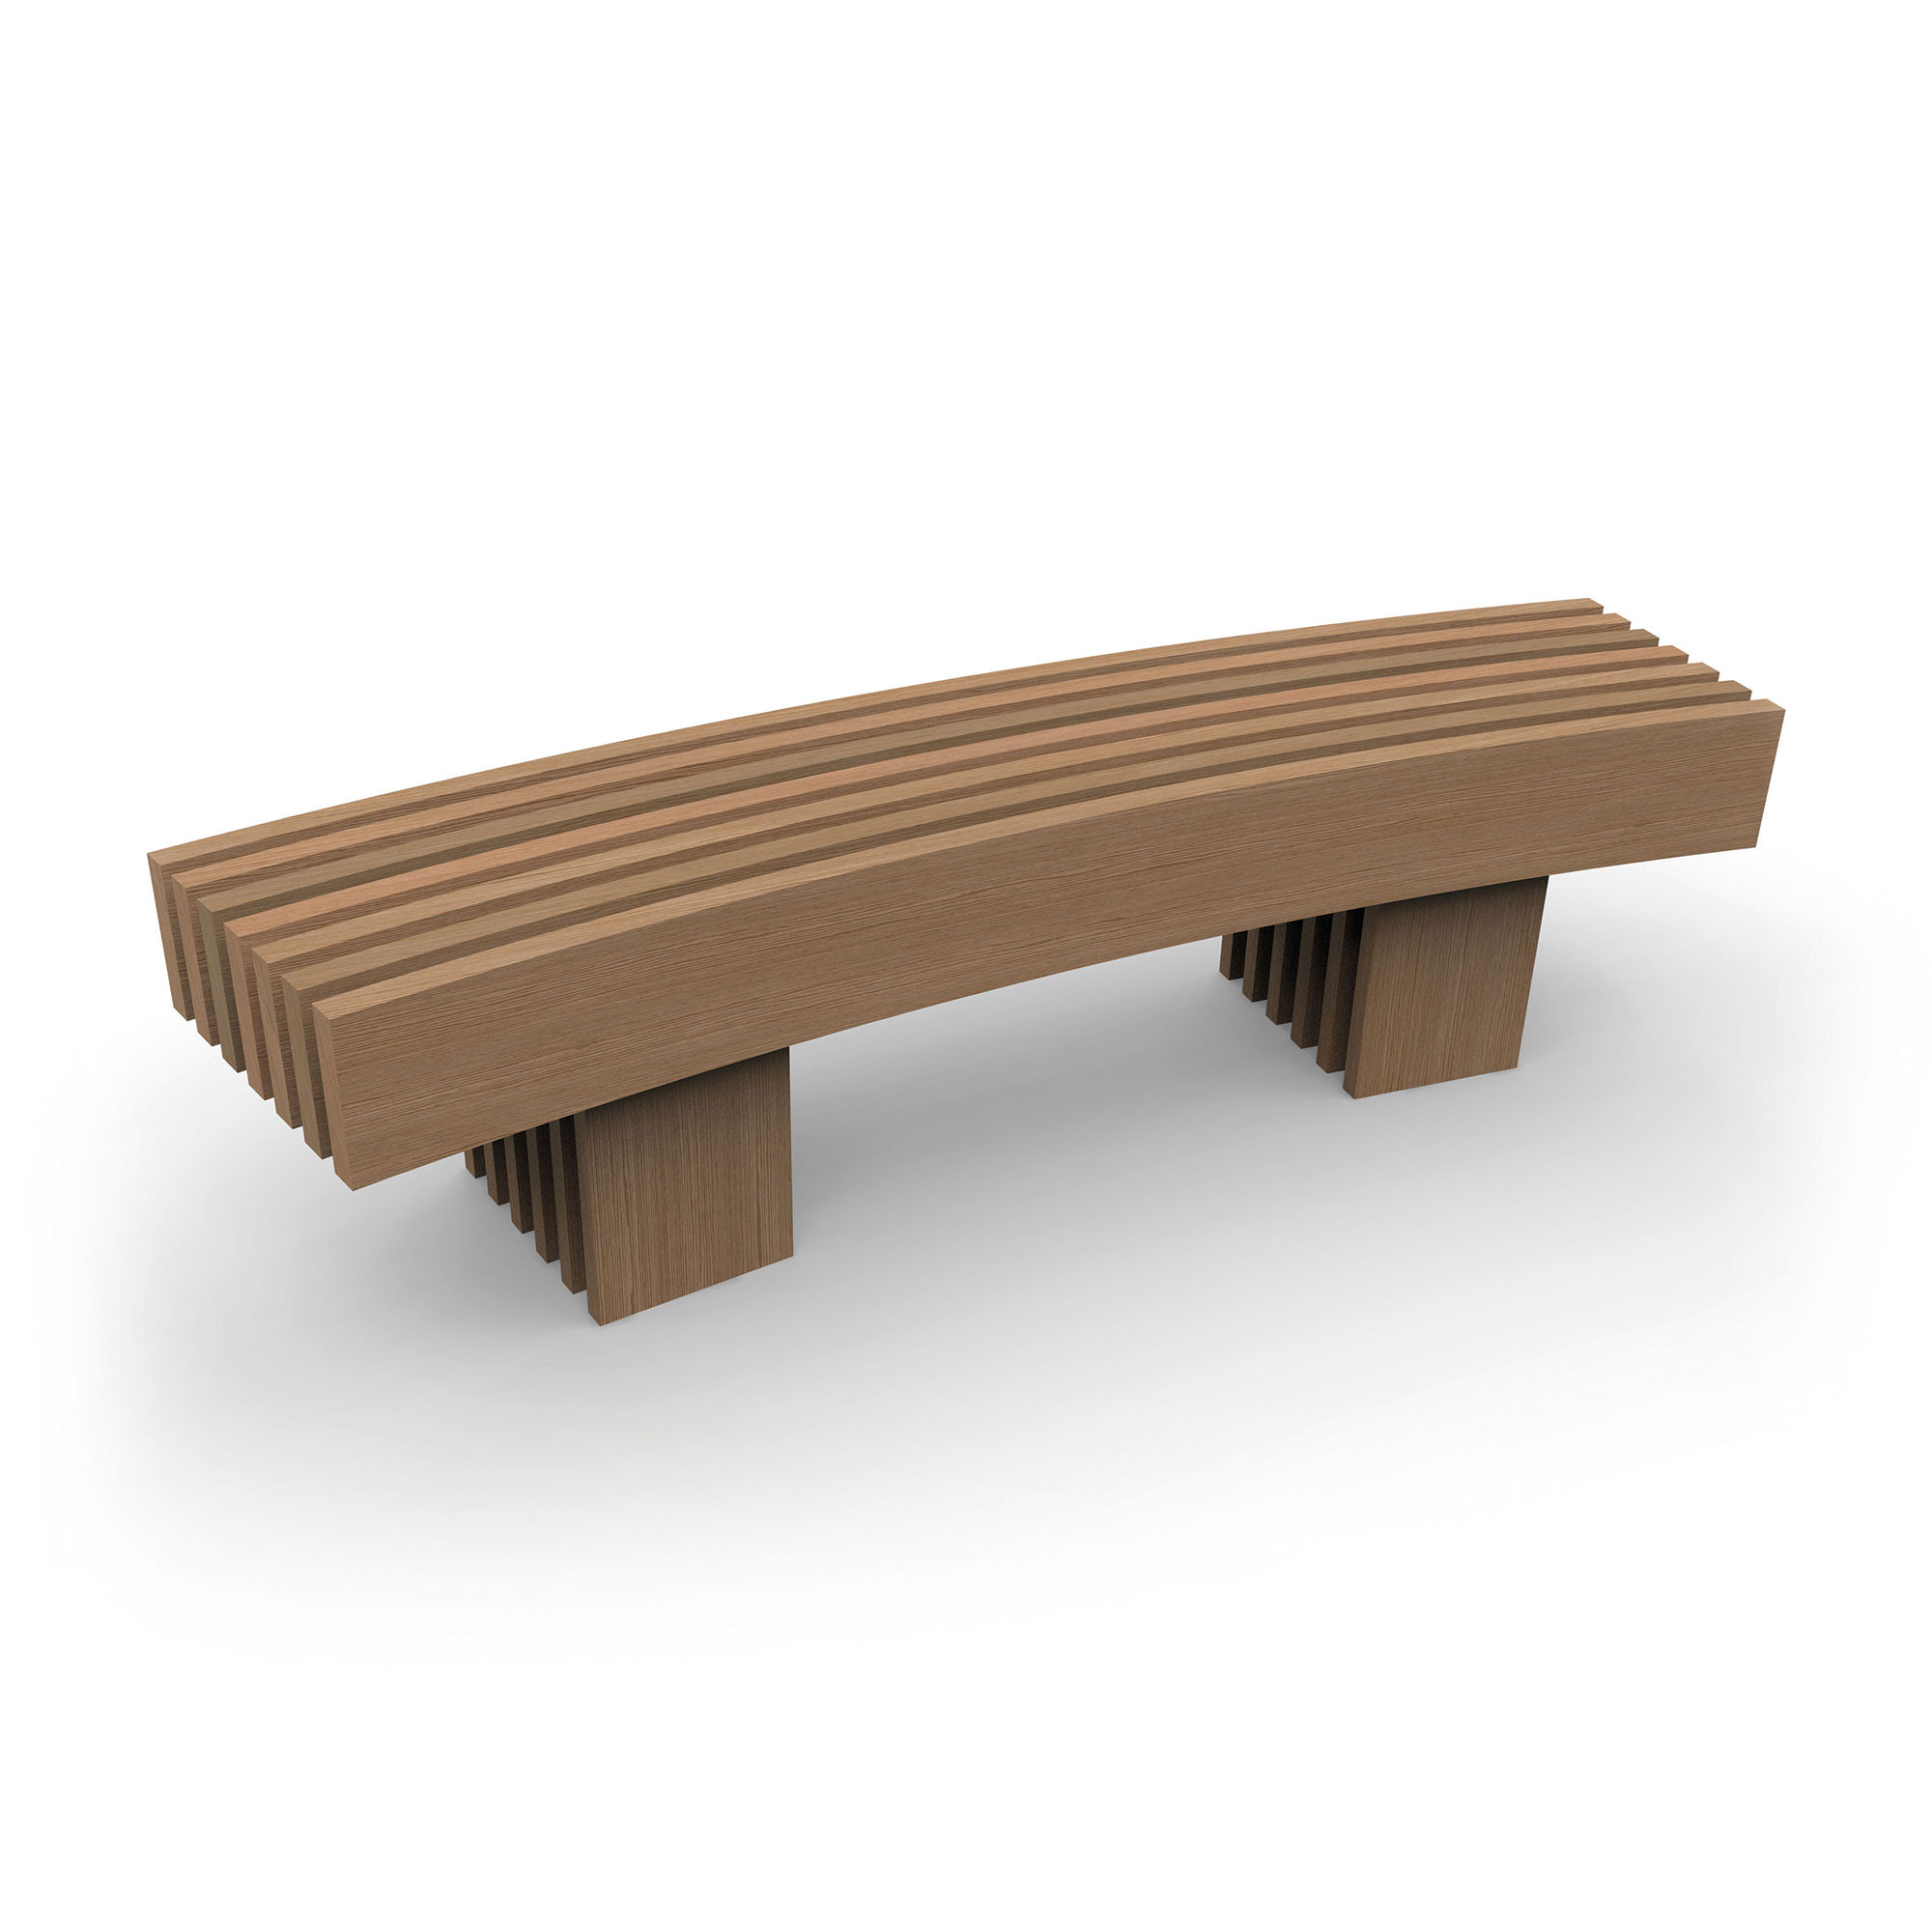 Type 8 Backless Bench : Curved